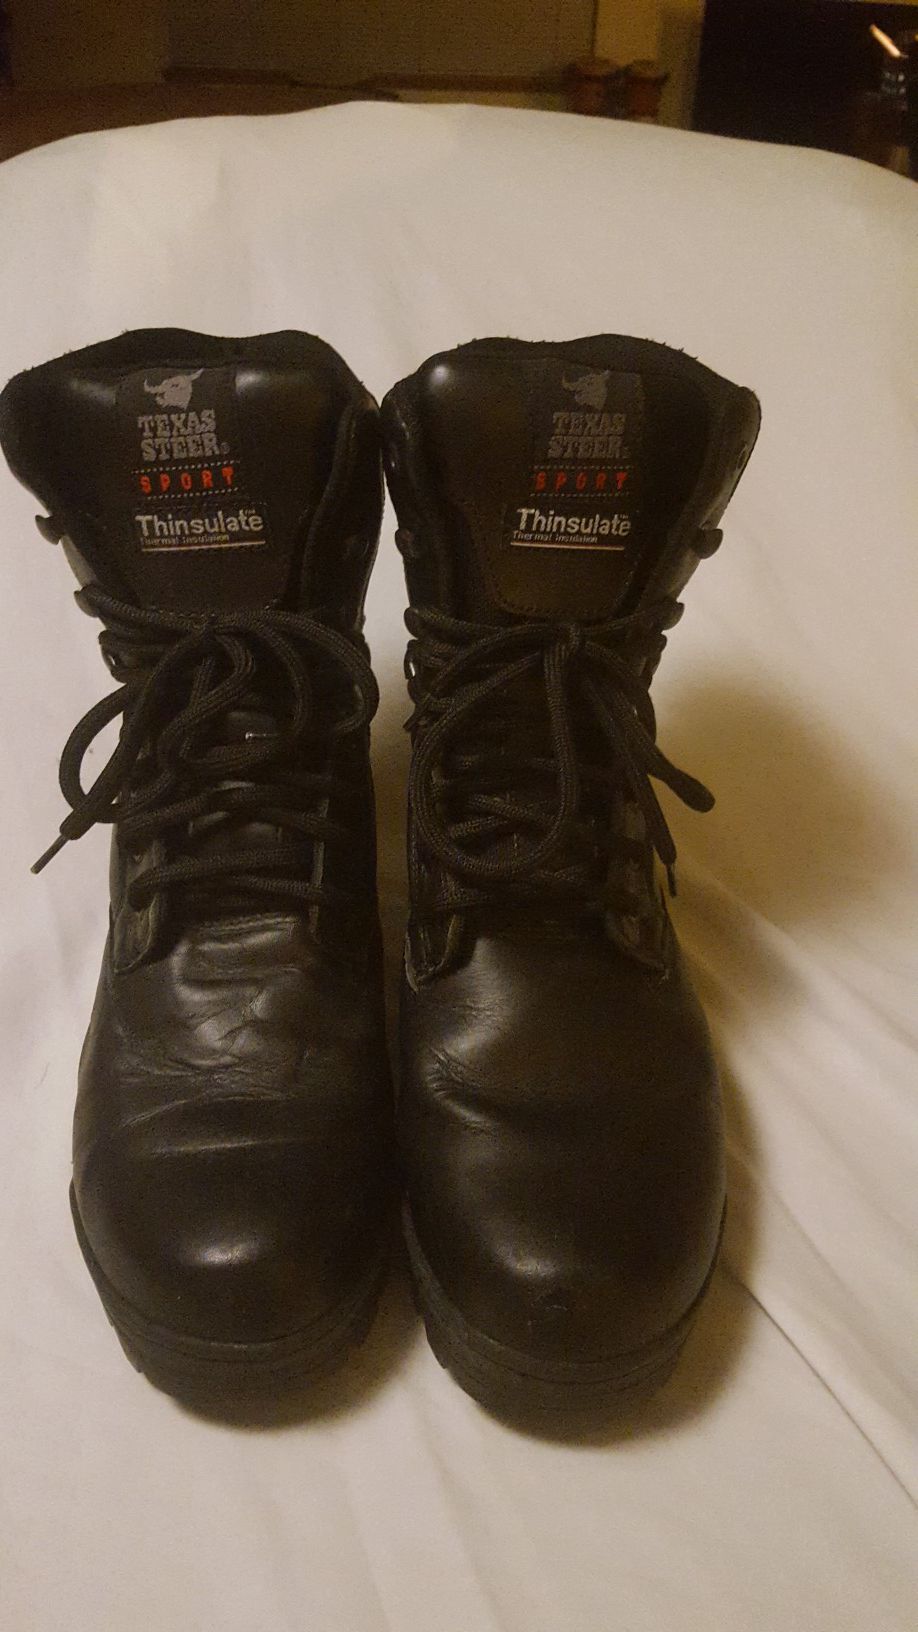 Texas Steer Sport men's insulated work boots size 12 black leather 10 inch height